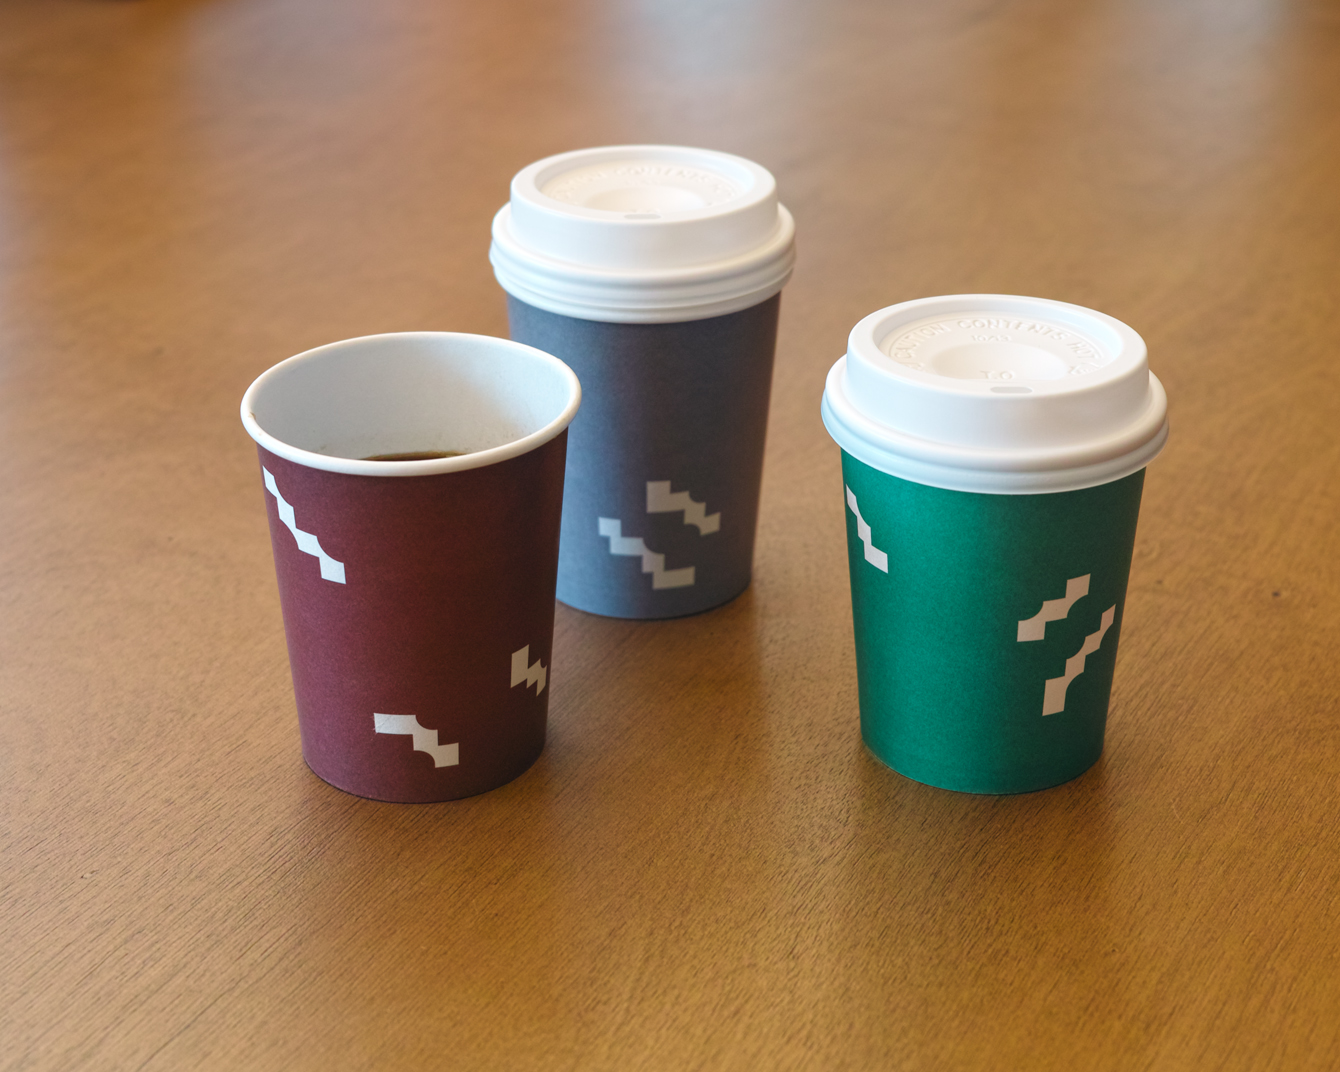 Graphic identity and coffee cup design by Studio fnt for South Korean cafe 대충유원지 Daechung Park